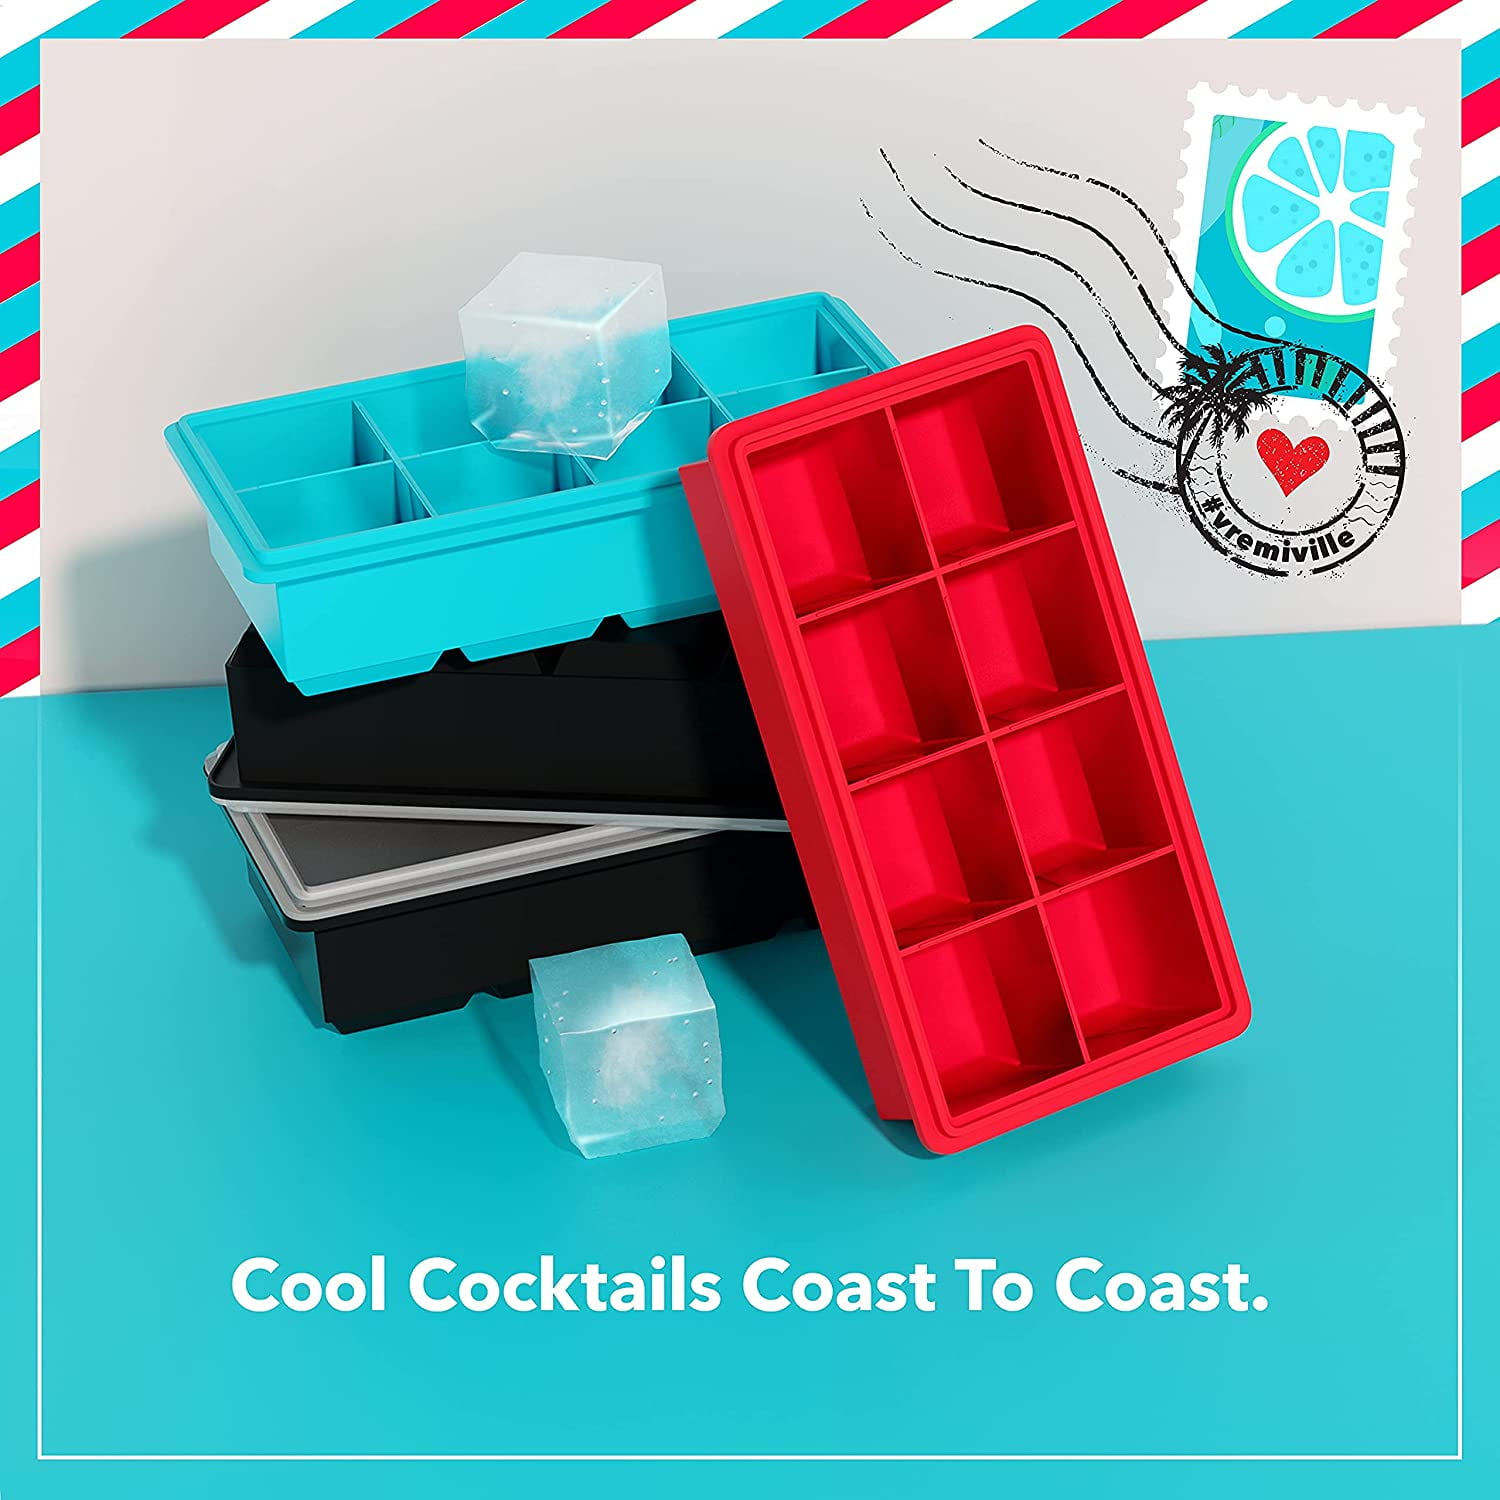 Cook Works - Red Pop-Out Ice Cube Trays, 2-Pack